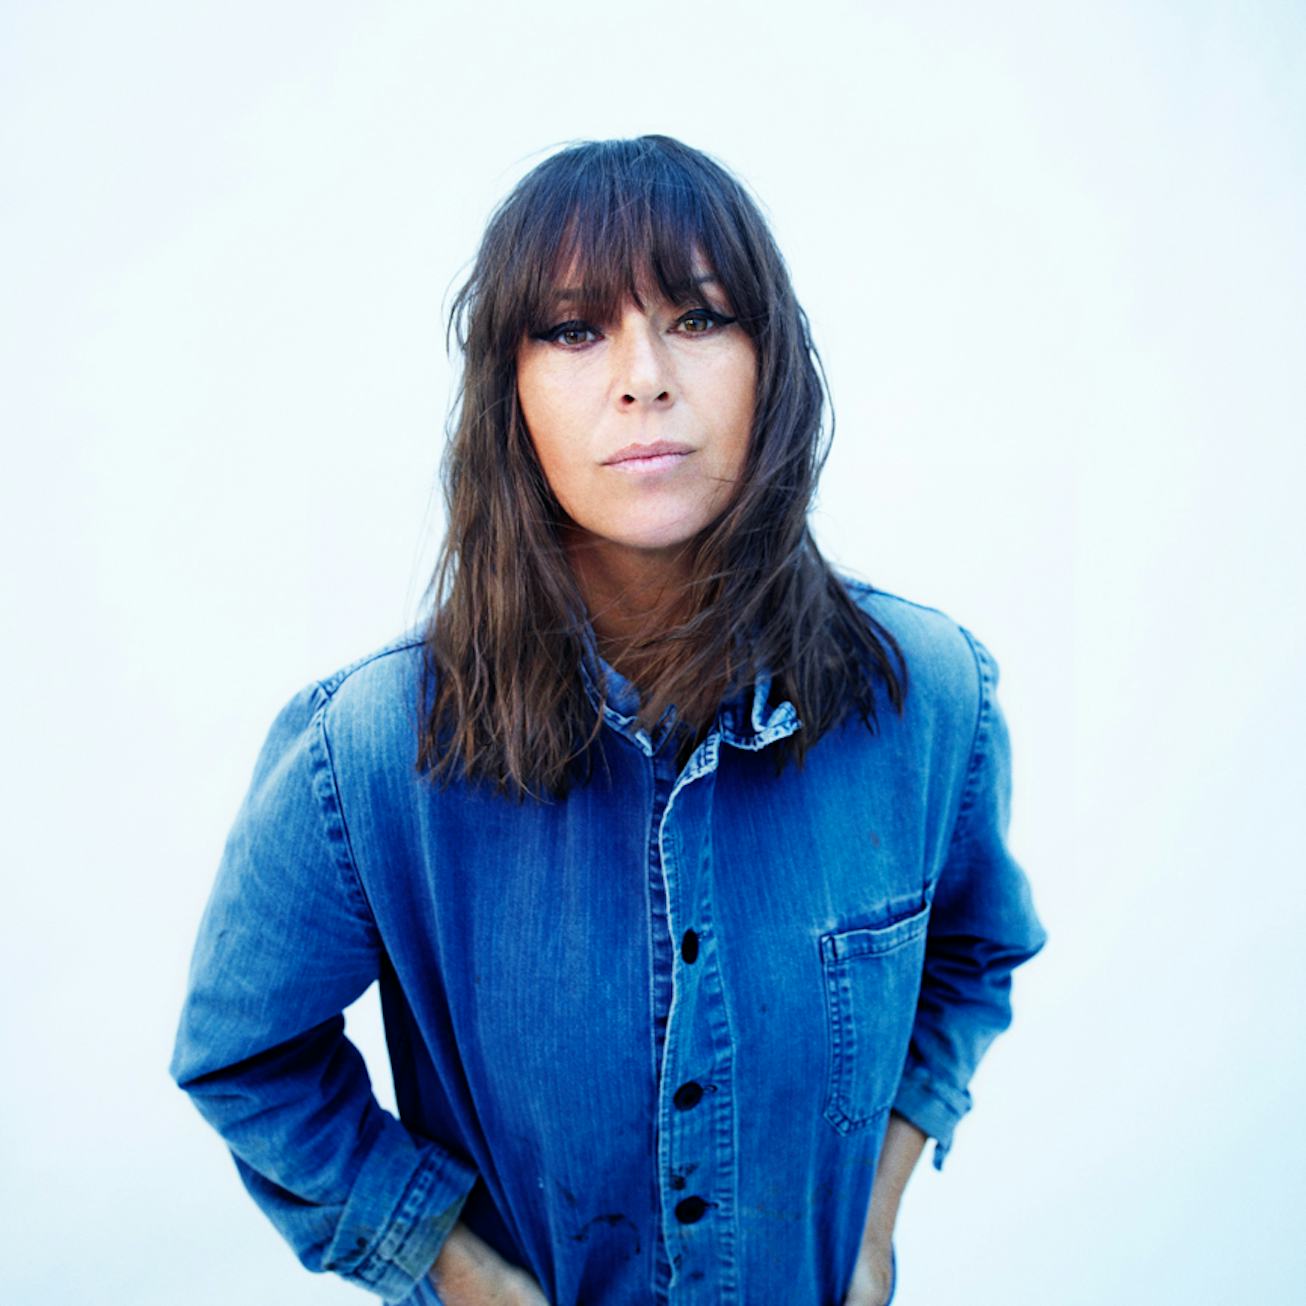 Cat Power announced her third covers album, 'Covers.'